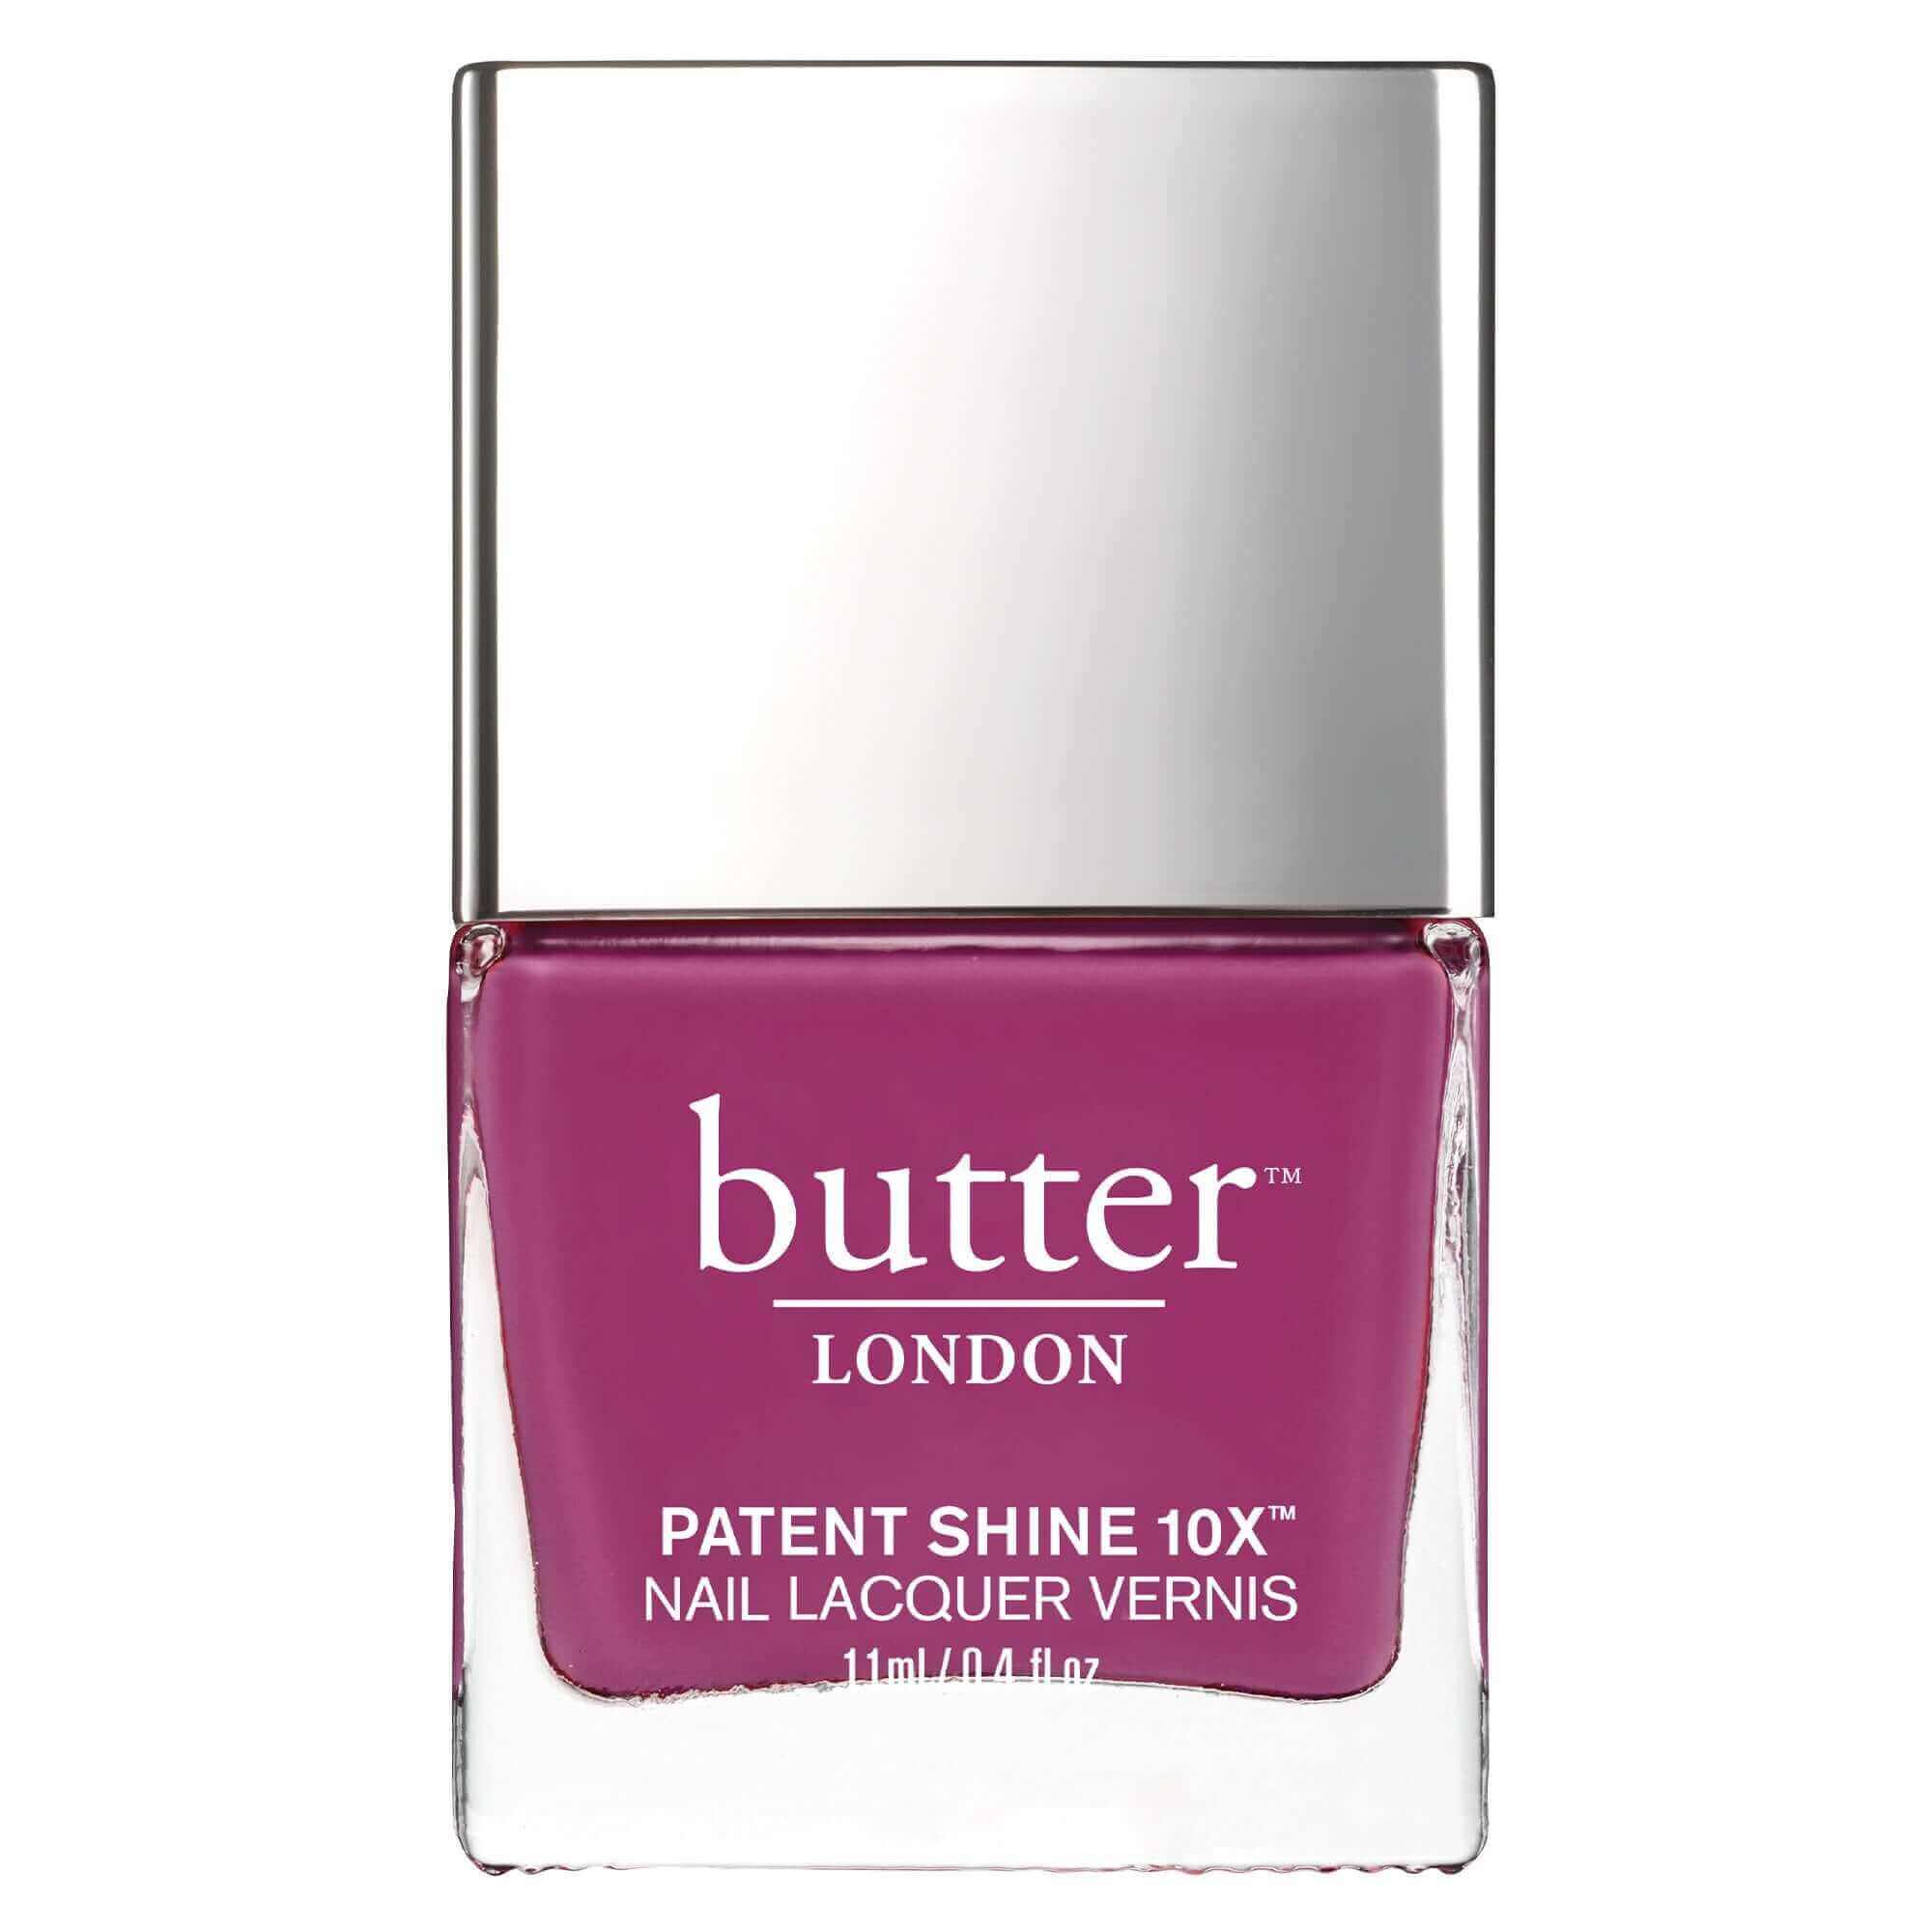 Amazon.com: butter LONDON Patent Shine 10X Nail Lacquer, Helps Protect &  Strengthen Nails, Gel-Like Finish & Chip-Resistant, 10-Free Formula, Vegan,  Cruelty & Paraben Free, Sandy Bum : Beauty & Personal Care